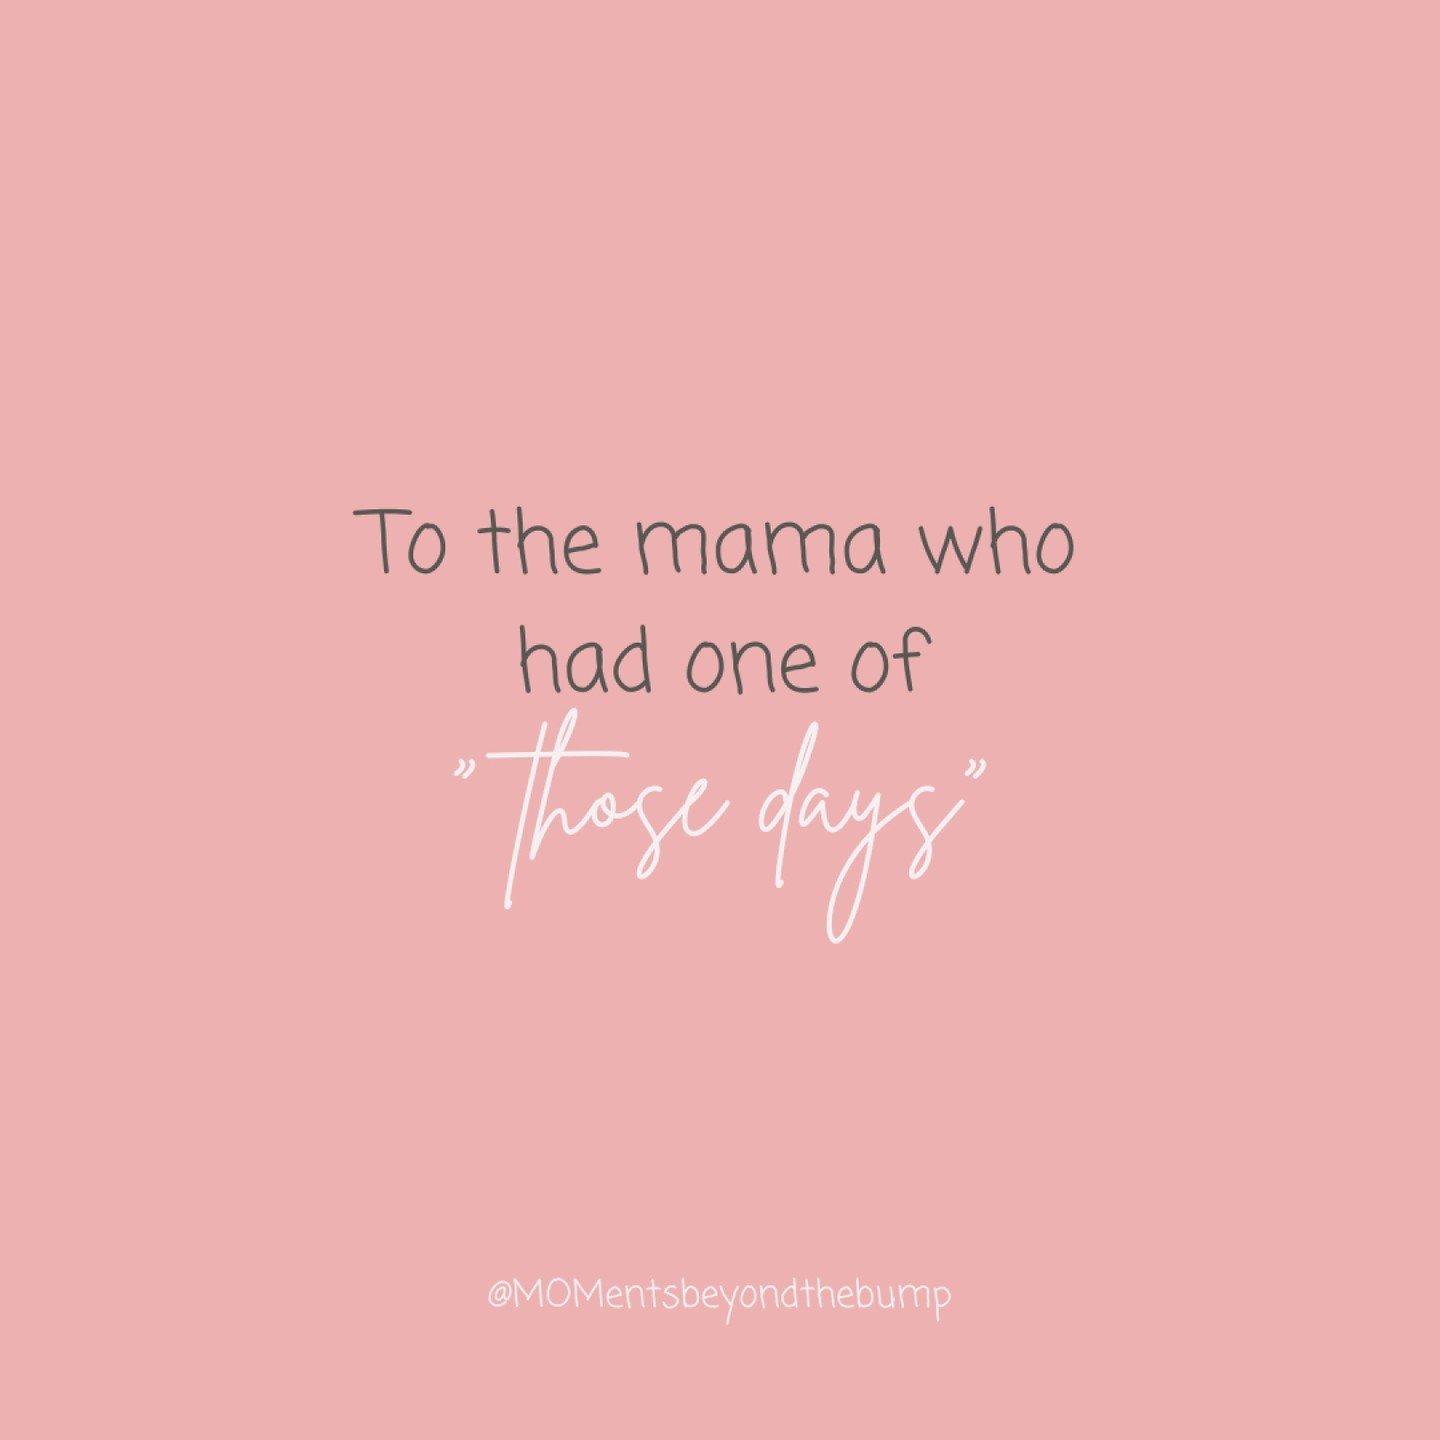 To the mama who had one of &quot;those days&quot;...

You are so loved. 💜